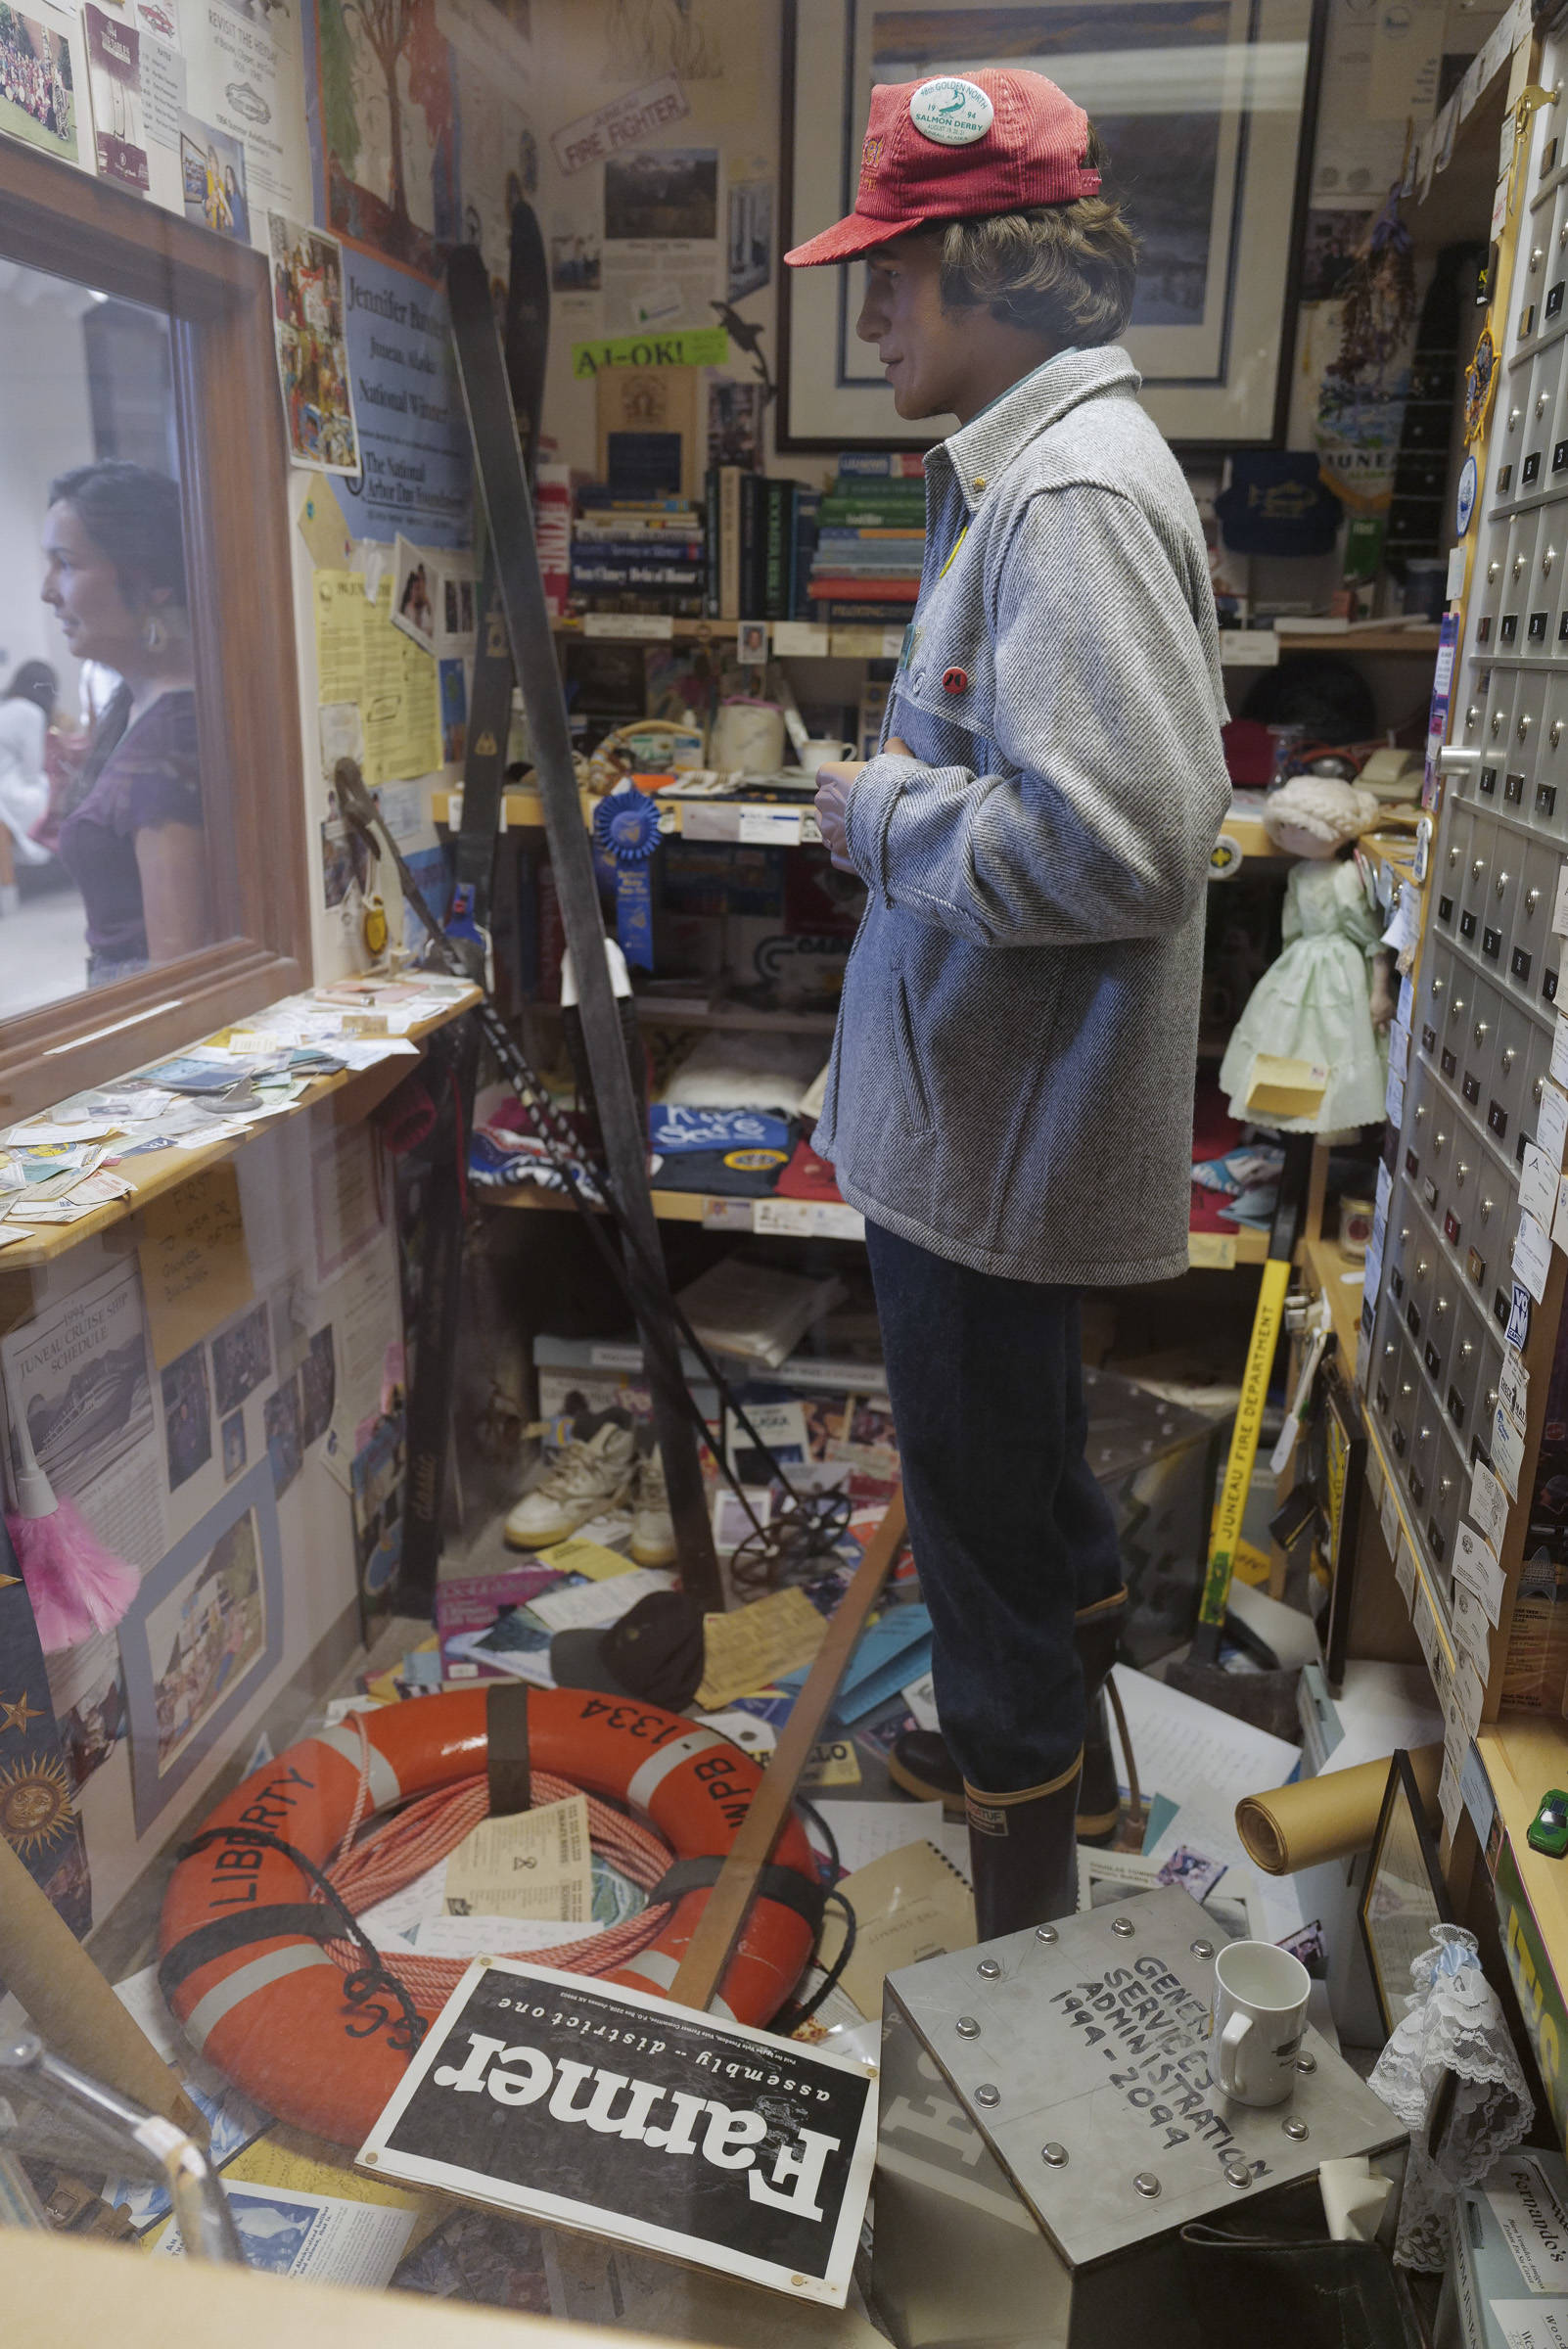 Inside the 1994 Juneau Time Capsule at the Hurff Ackerman Saunders Federal Building in Juneau on Friday, Aug. 9, 2019. Twenty-five year ago, a janitors closet was turned into the Juneau Time Capsule. The capsule is set to be opened in 75 more years. (Michael Penn | Juneau Empire)